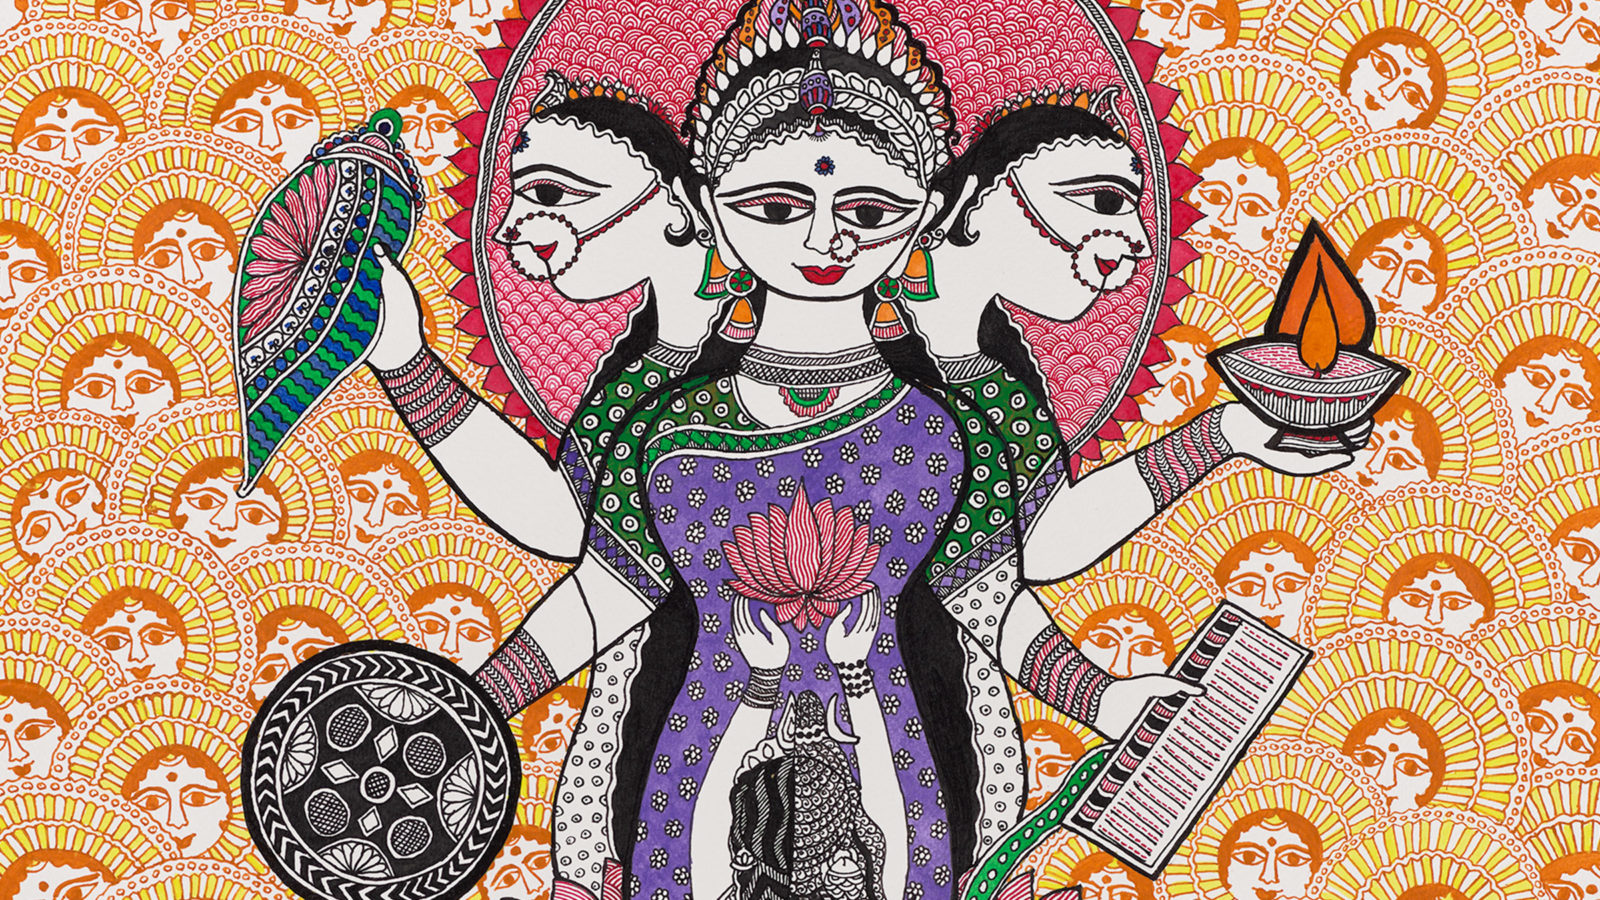 Painting is My Everything: Art from India's Mithila Region - Exhibitions -  Asian Art Museum